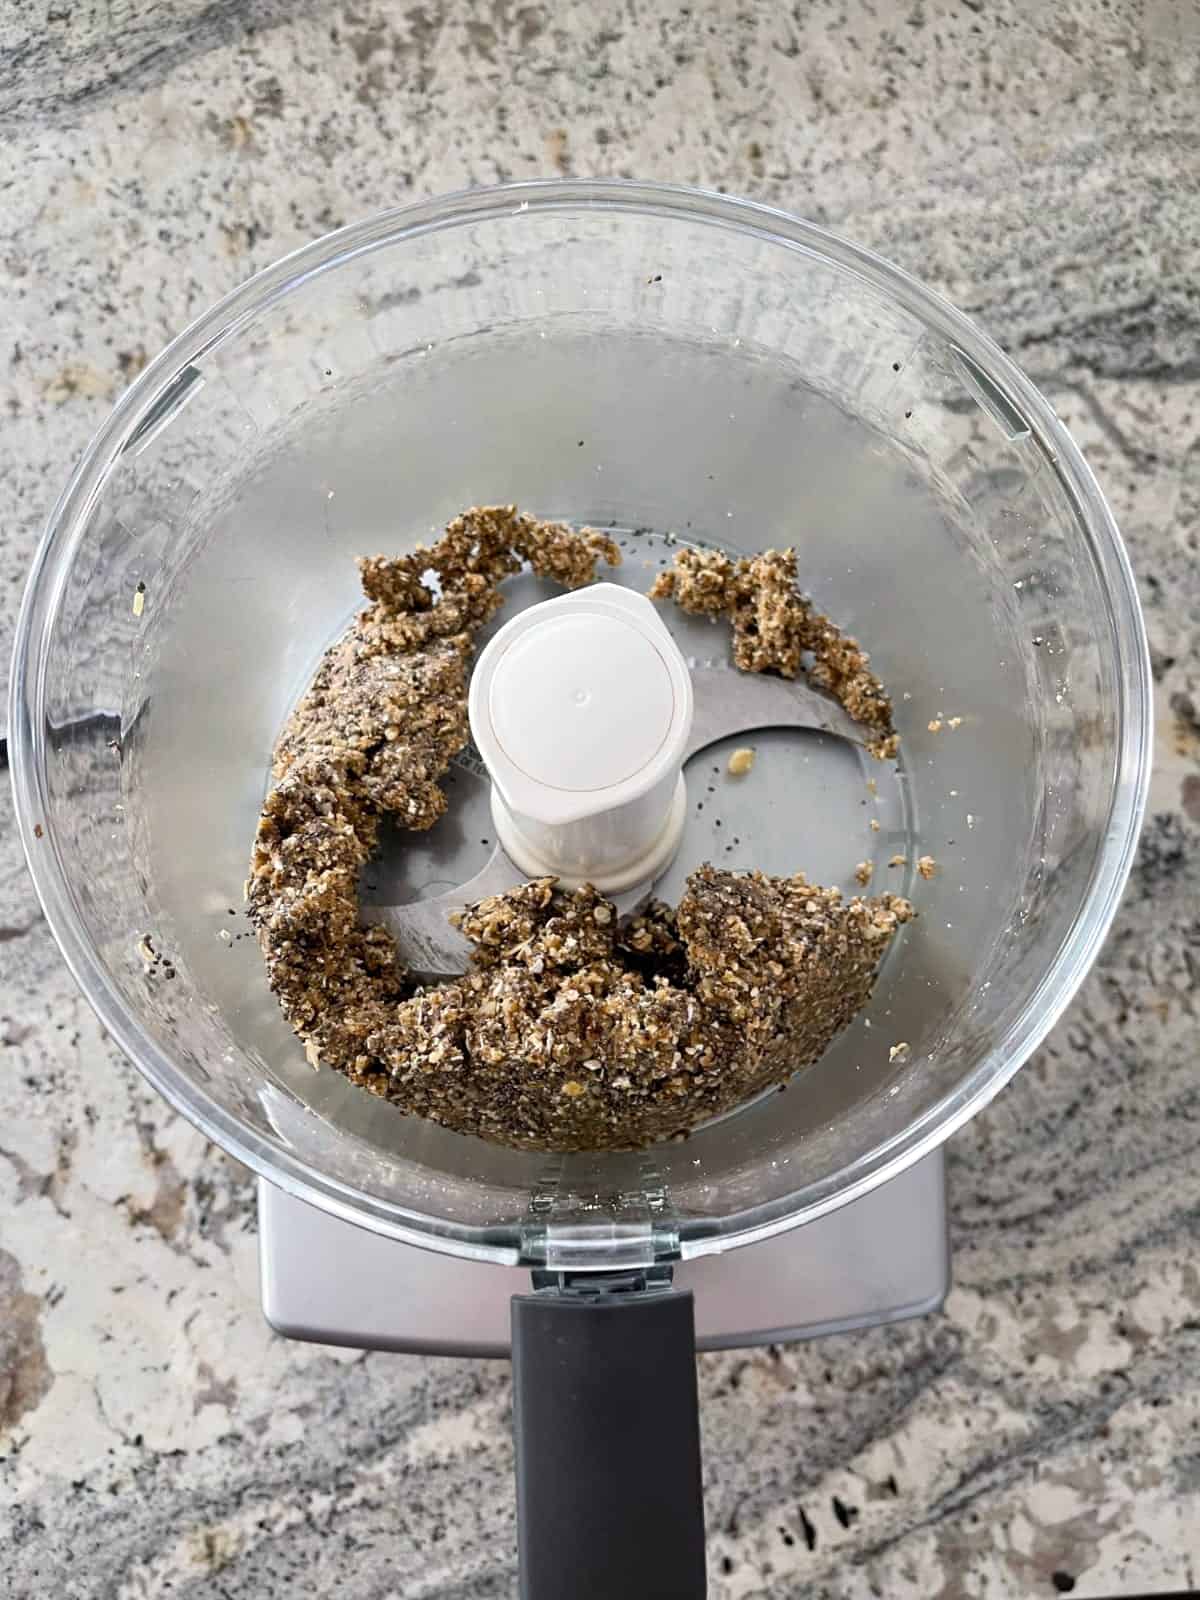 Walnuts, dates, oats and chia seeds in food processor.